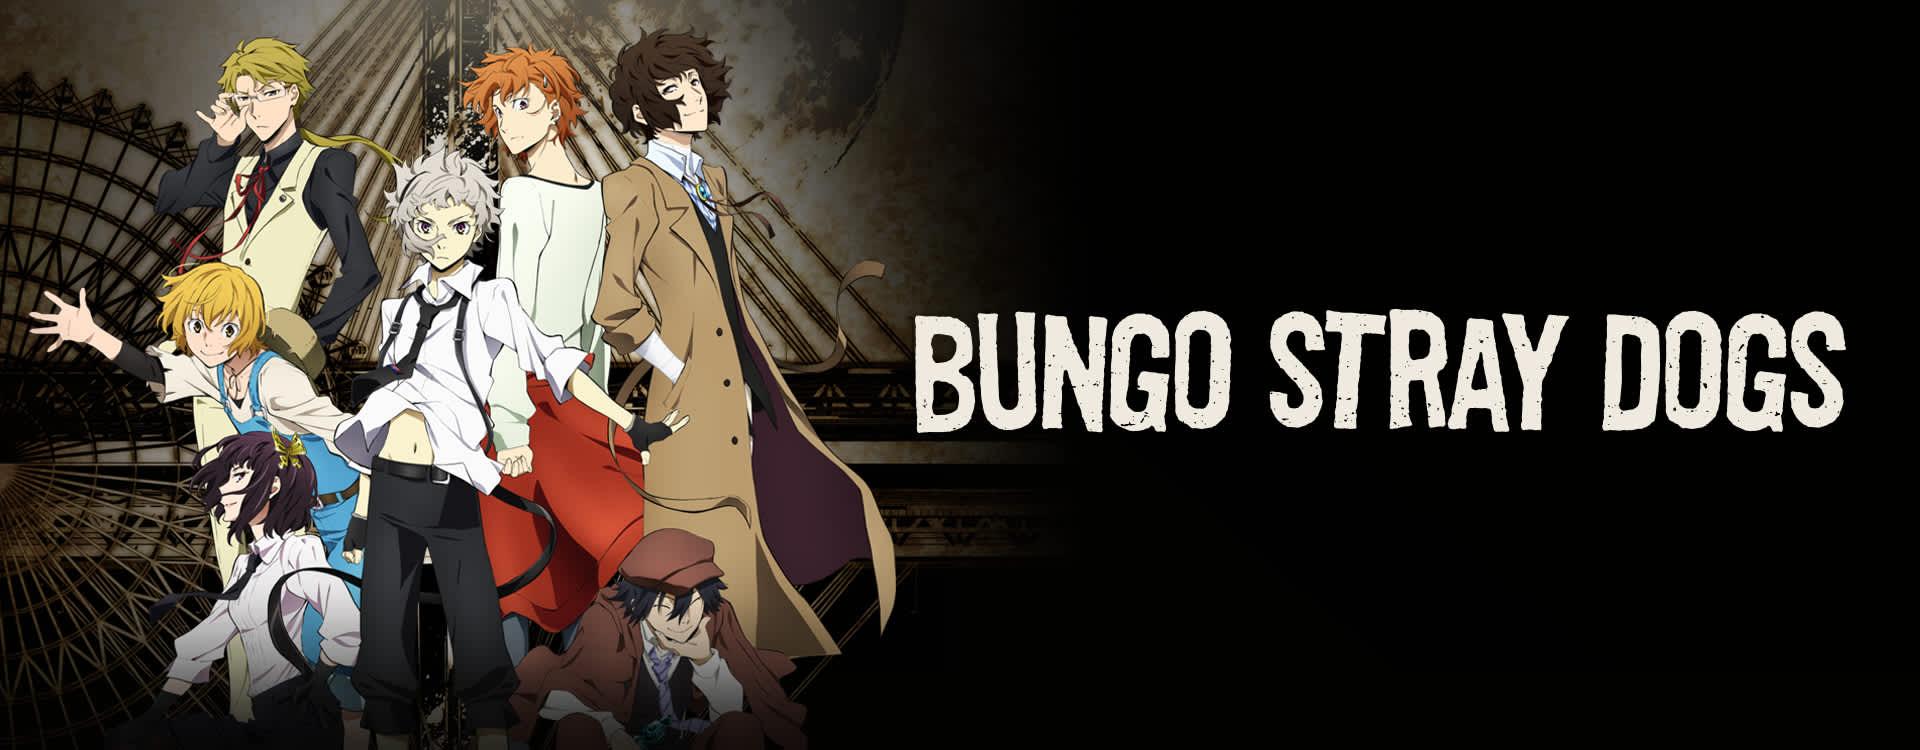 Decay of Angels Bungou Stray Dogs  Bungo stray dogs, Bungou stray dogs,  Stray dog